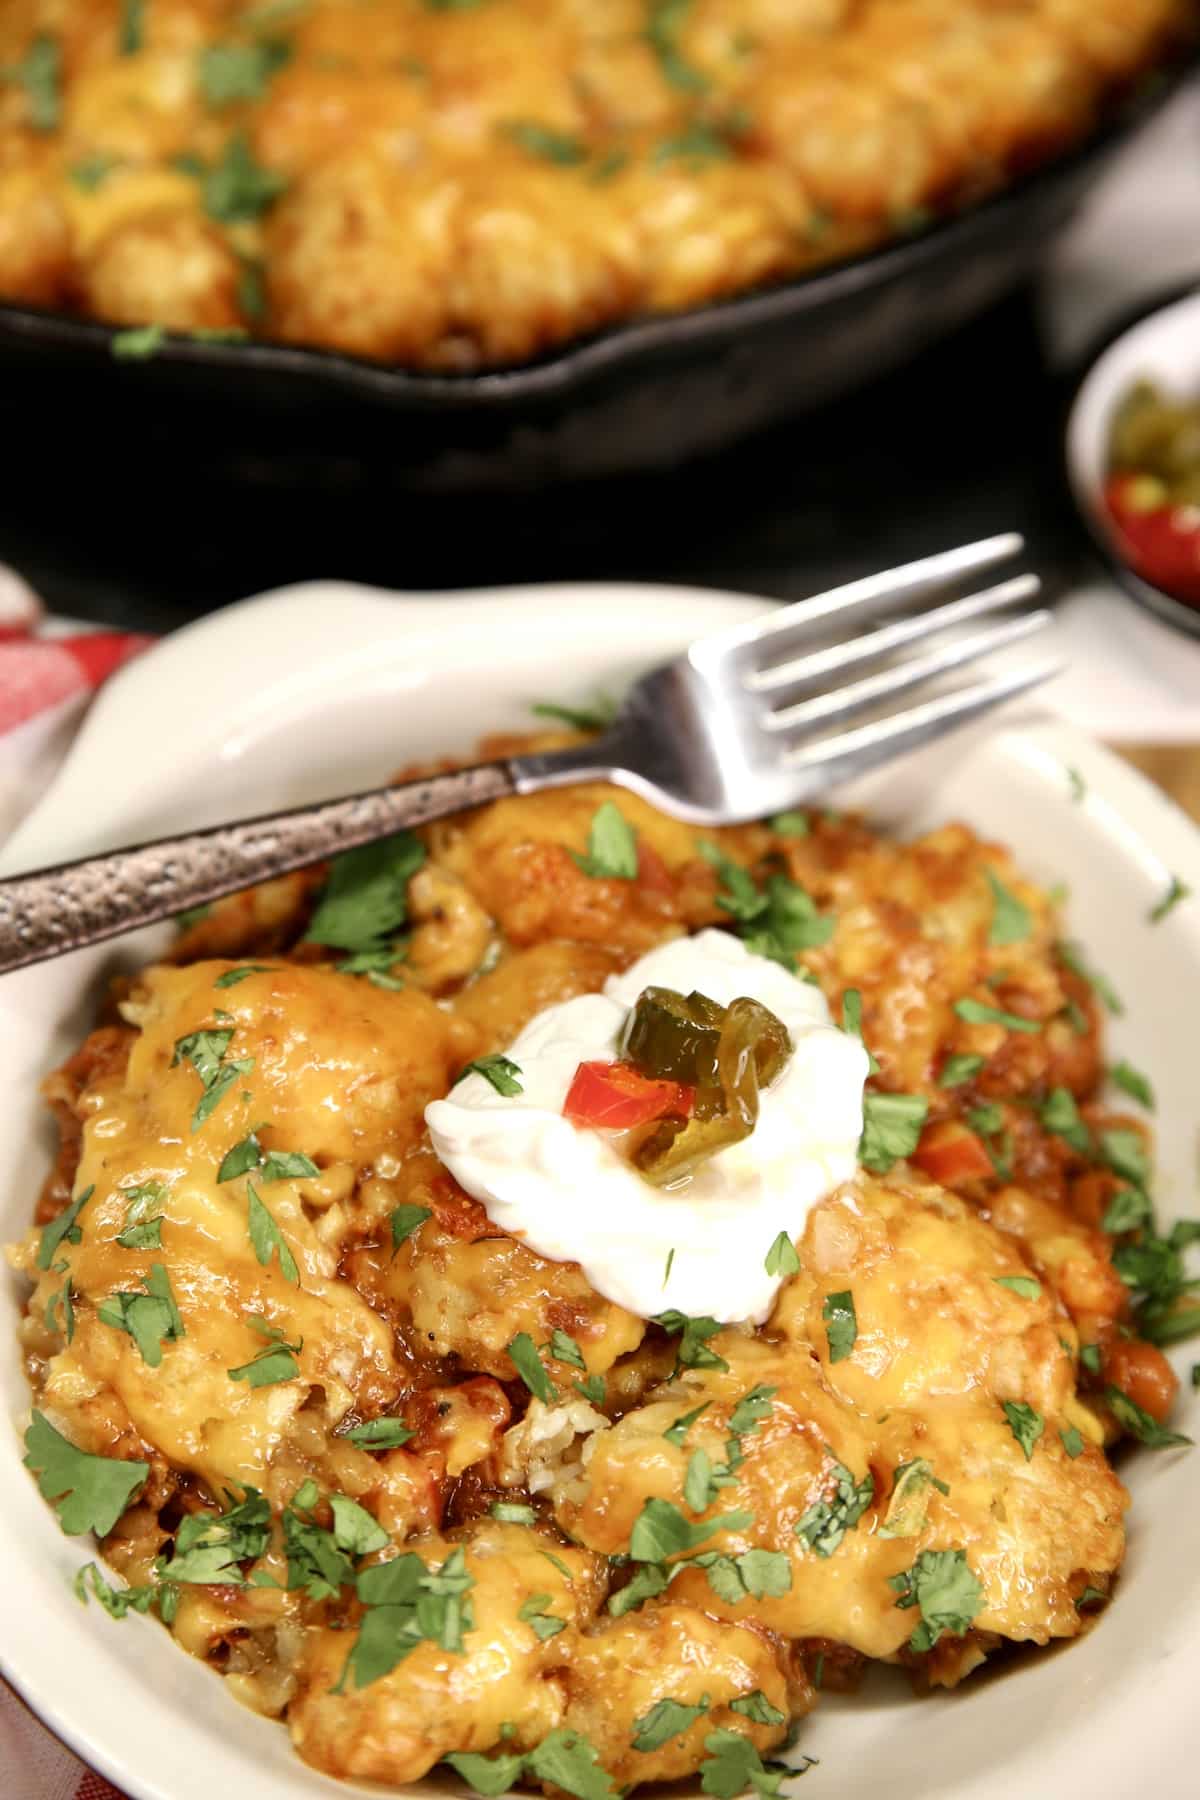 Chili Cheese Tater Tot Casserole in a dish with sour cream and jalapenos.